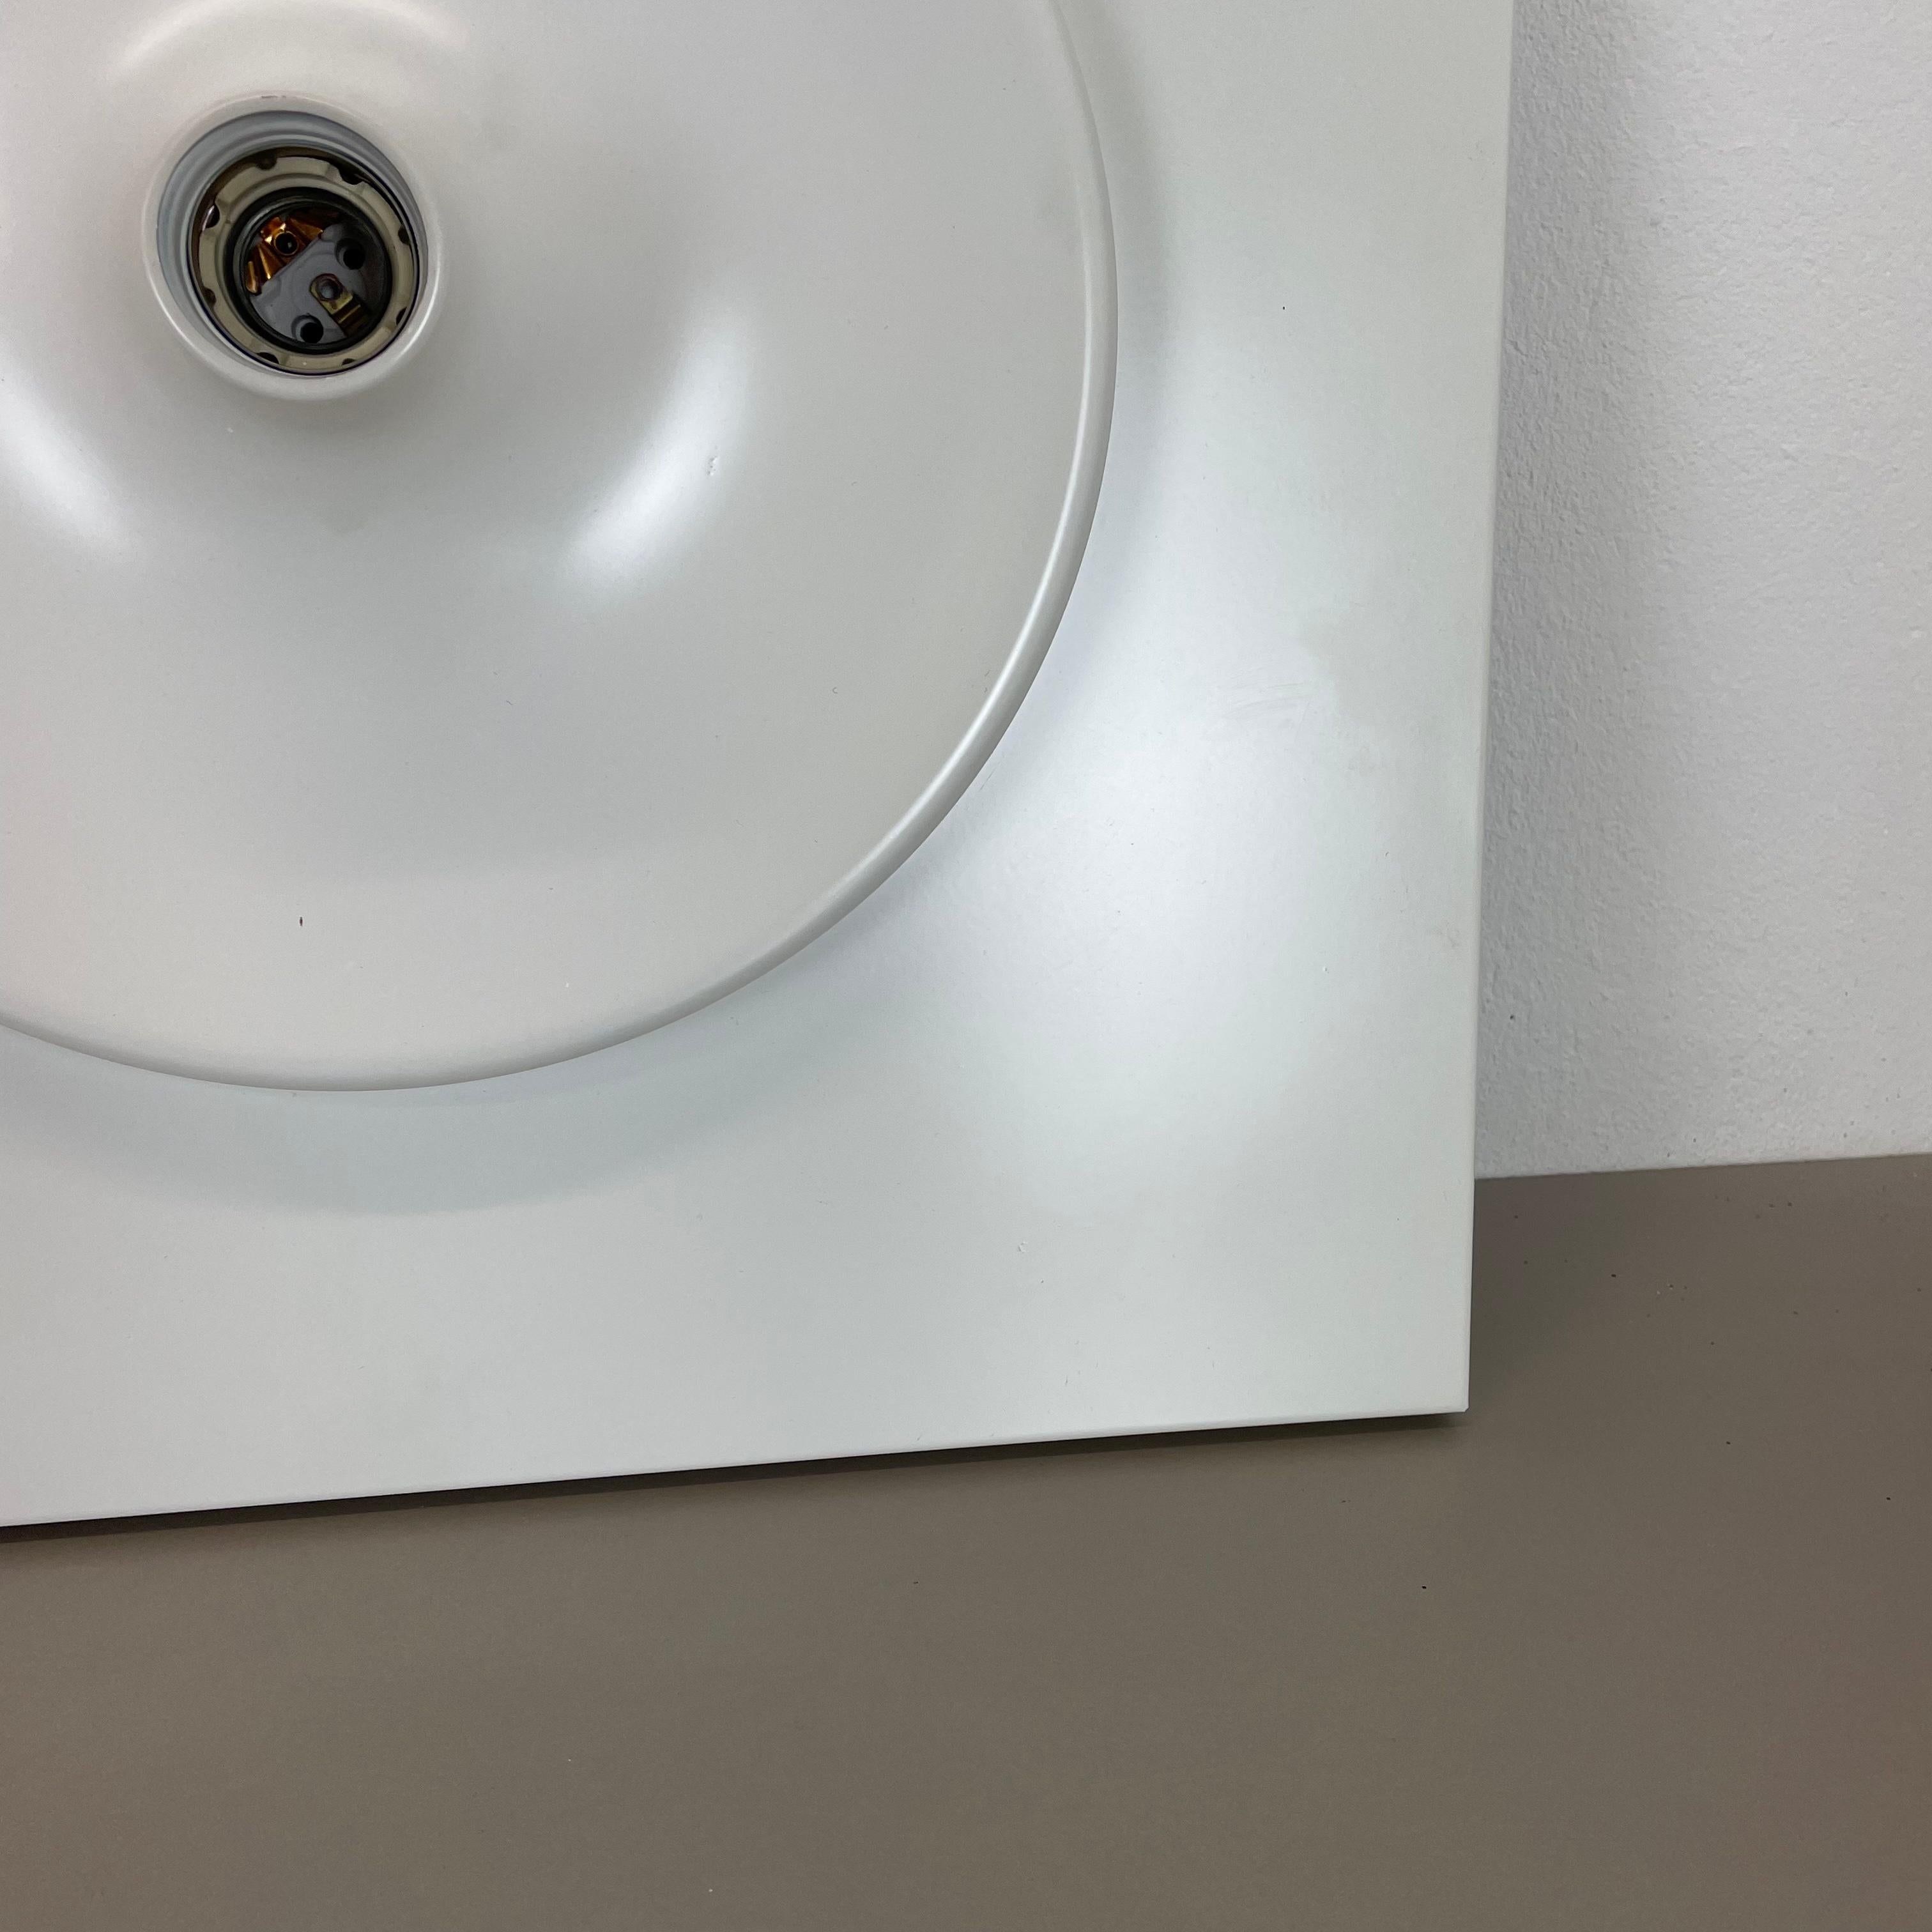 Rare White Xxl Wall Light Panel Element, Germany 1980s For Sale 3